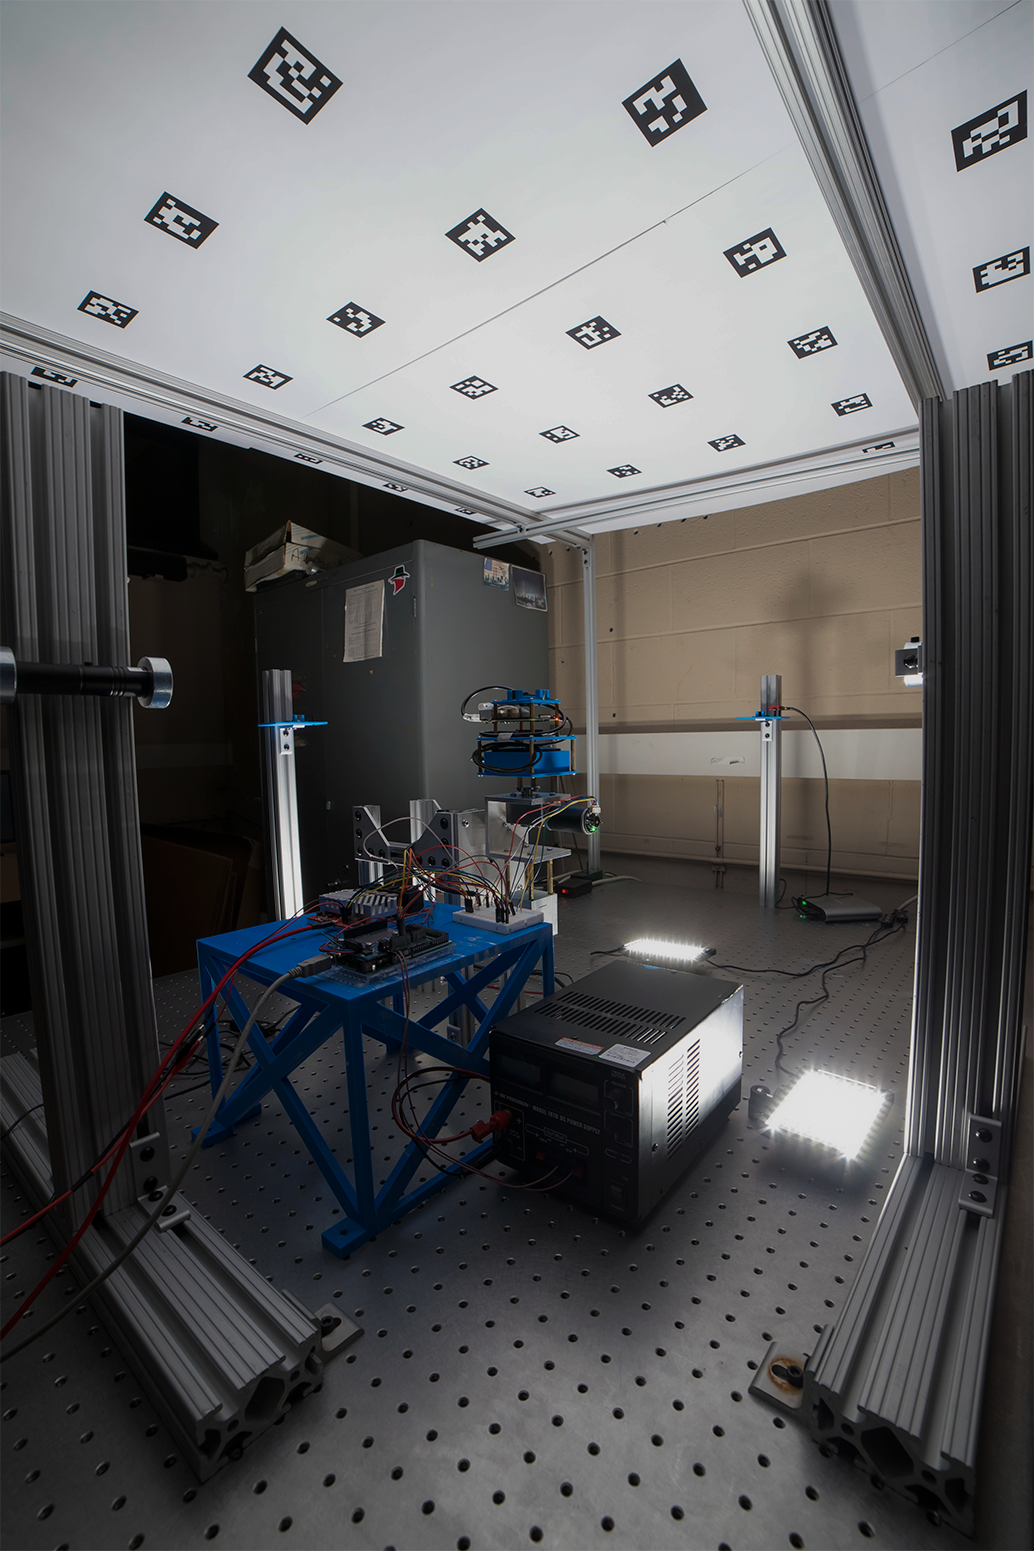 Unedited photograph of laboratory hardware setup for characterizing a camera system.